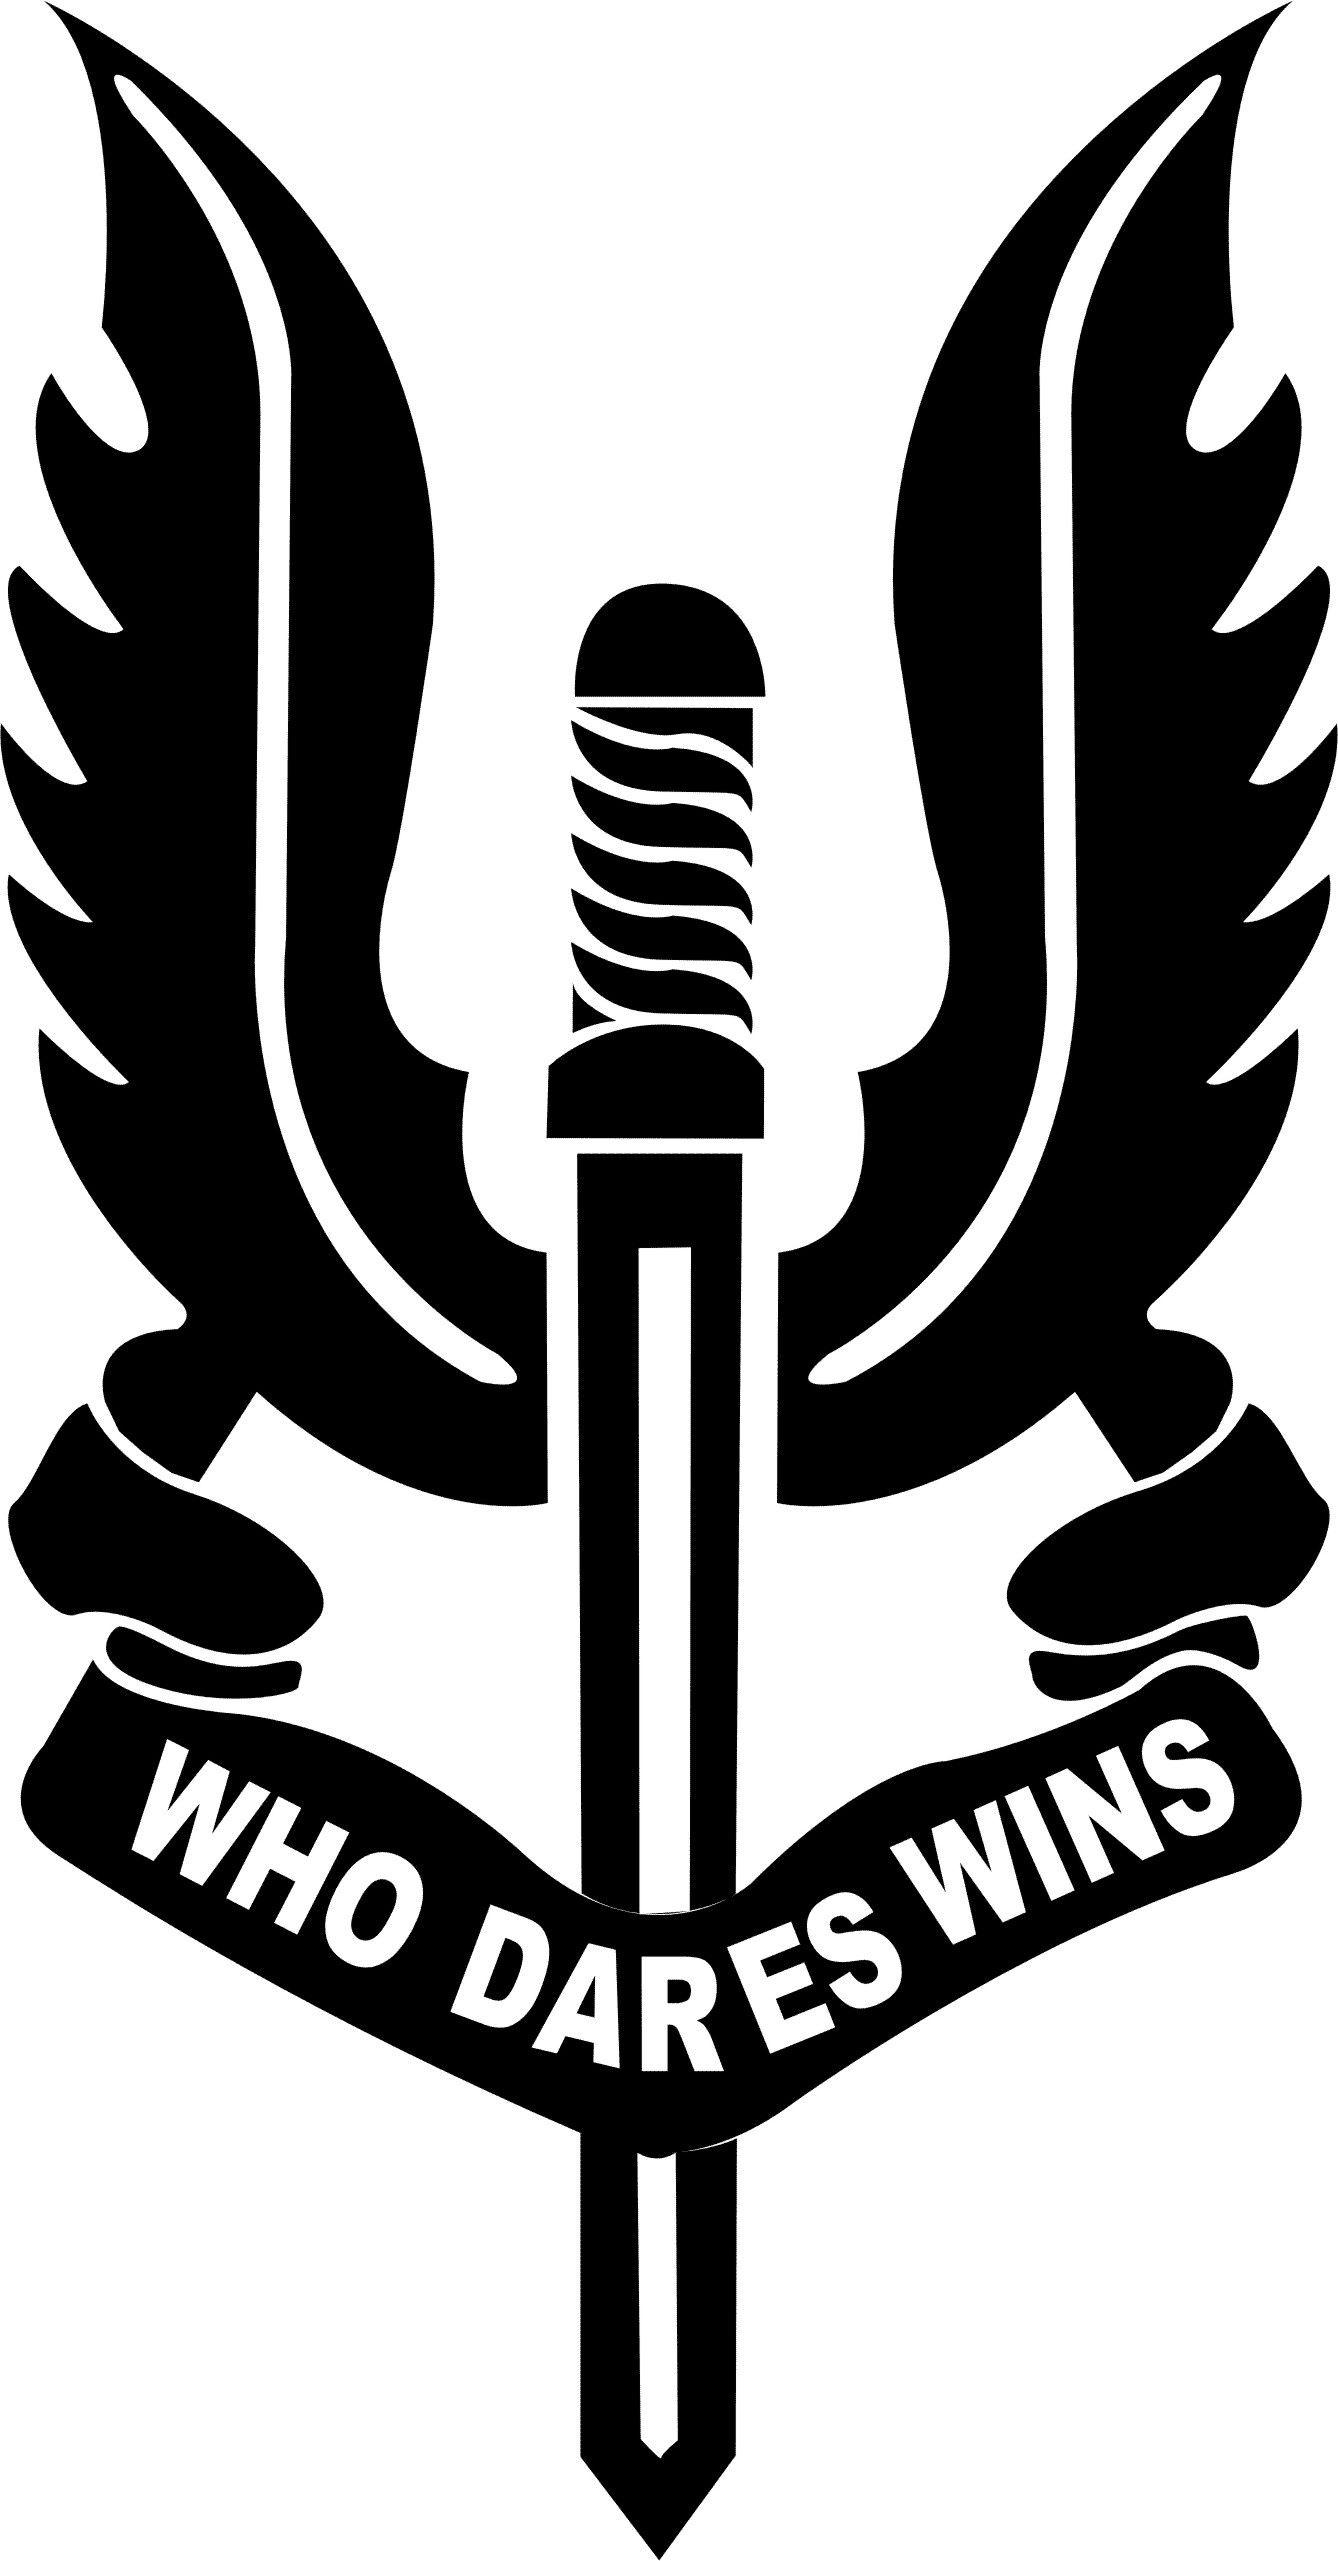 Who dares wins. Special forces logo, Sas special forces